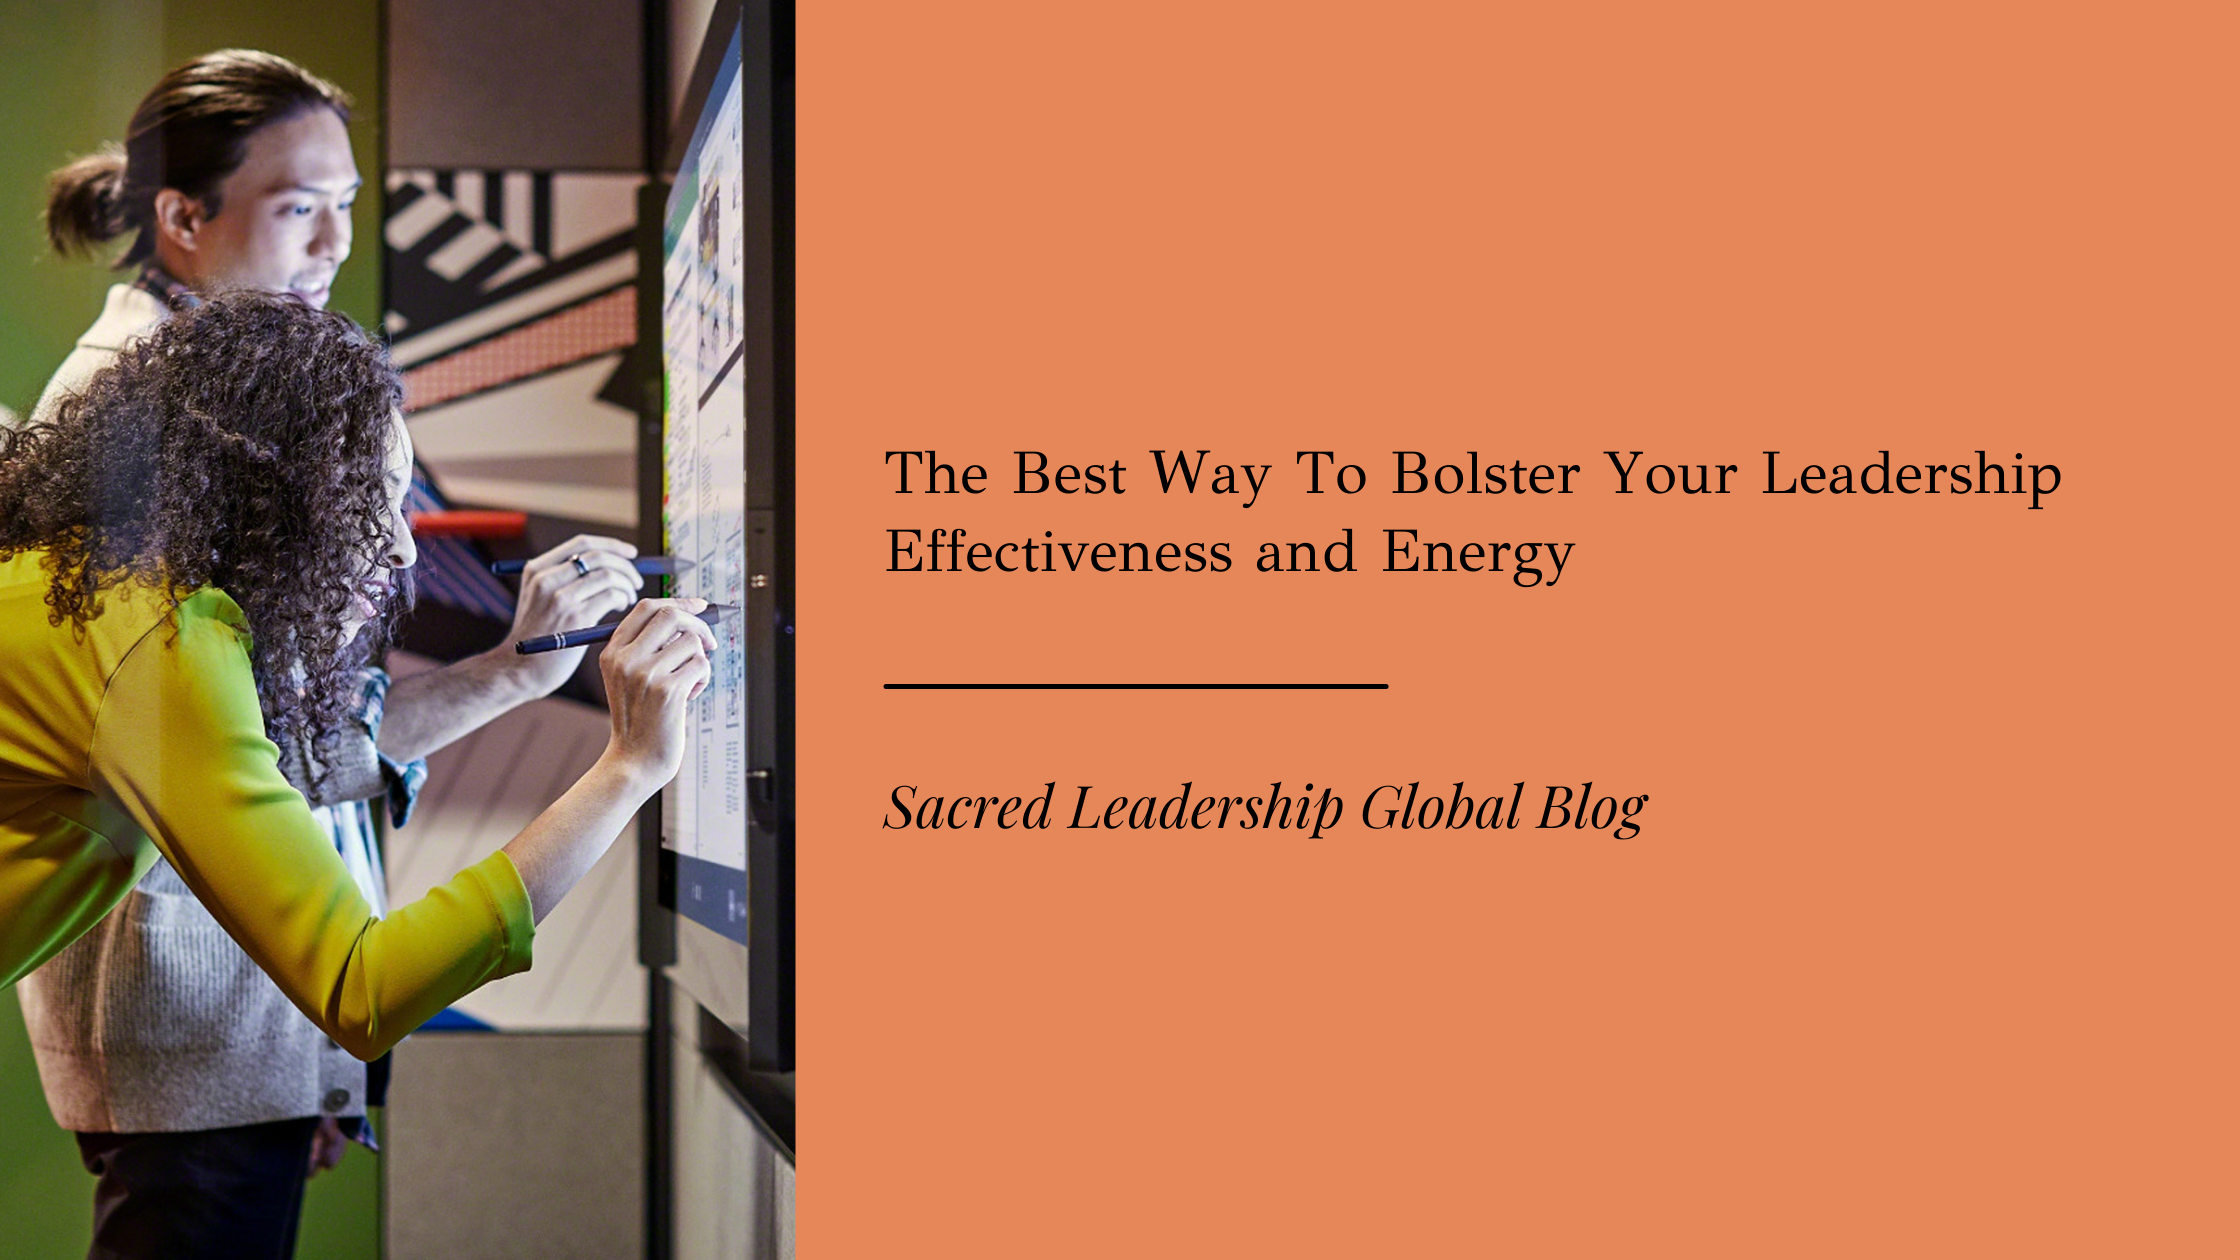 The Best Way to Bolster YOur Effectiveness and Energy Blog Image